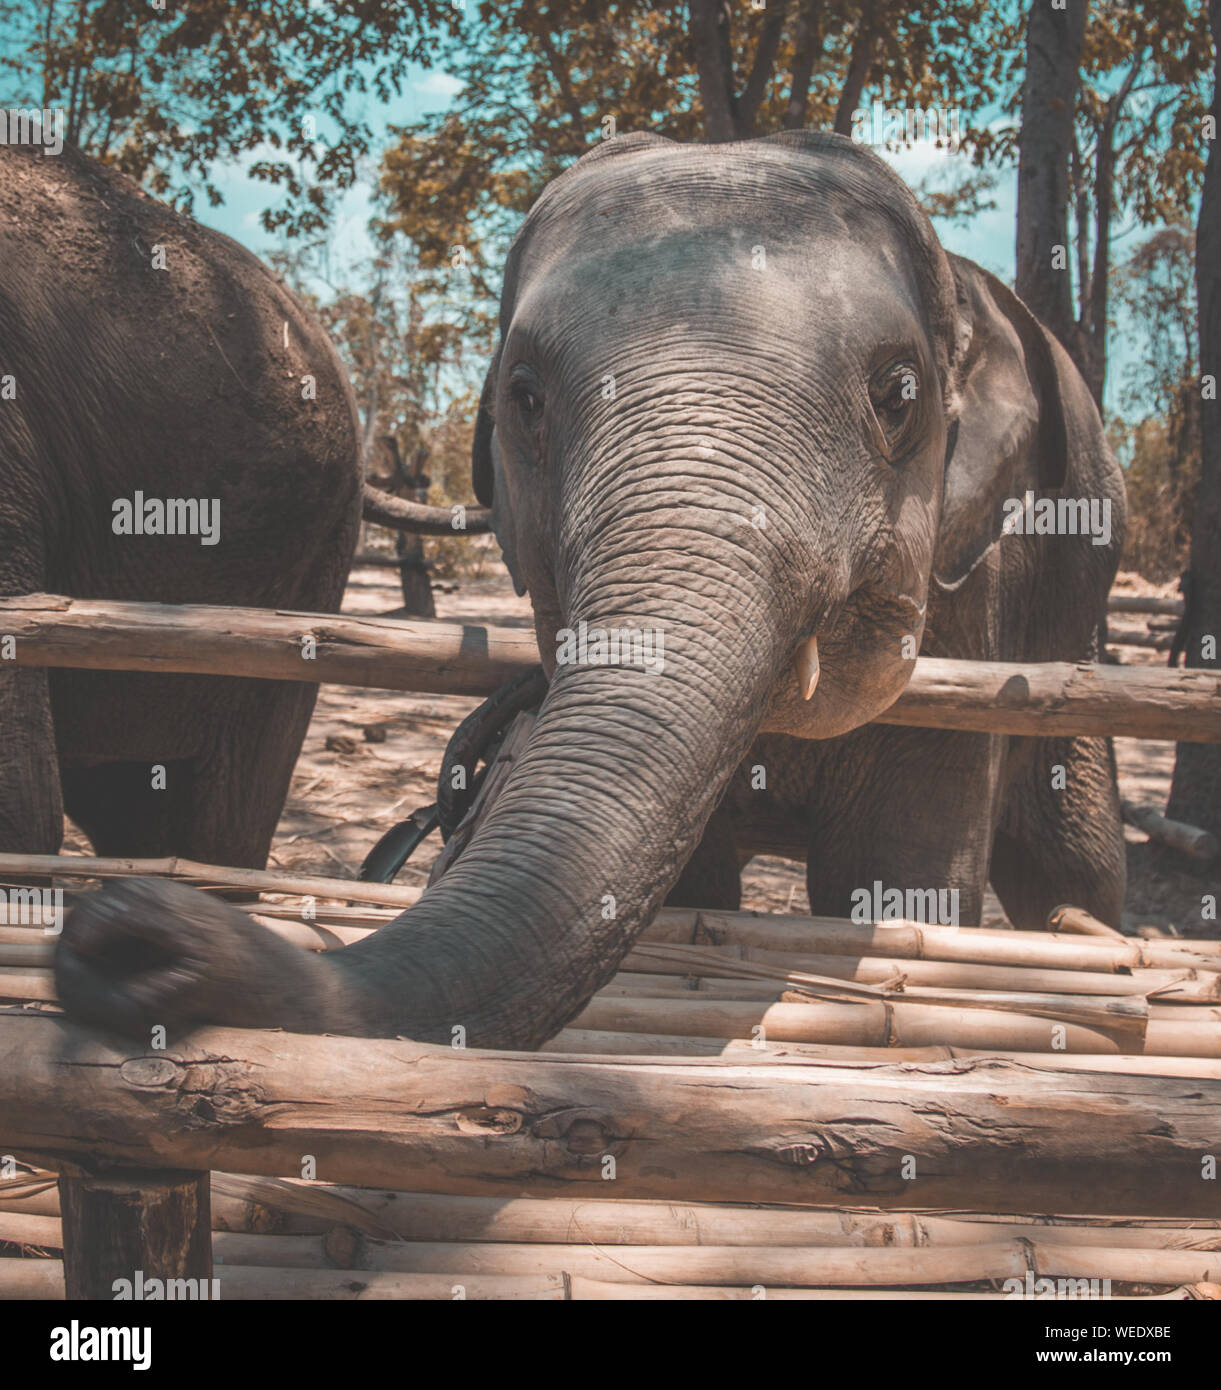 Elephant Sanctuary bathing in Isaan in Thailand Stock Photo